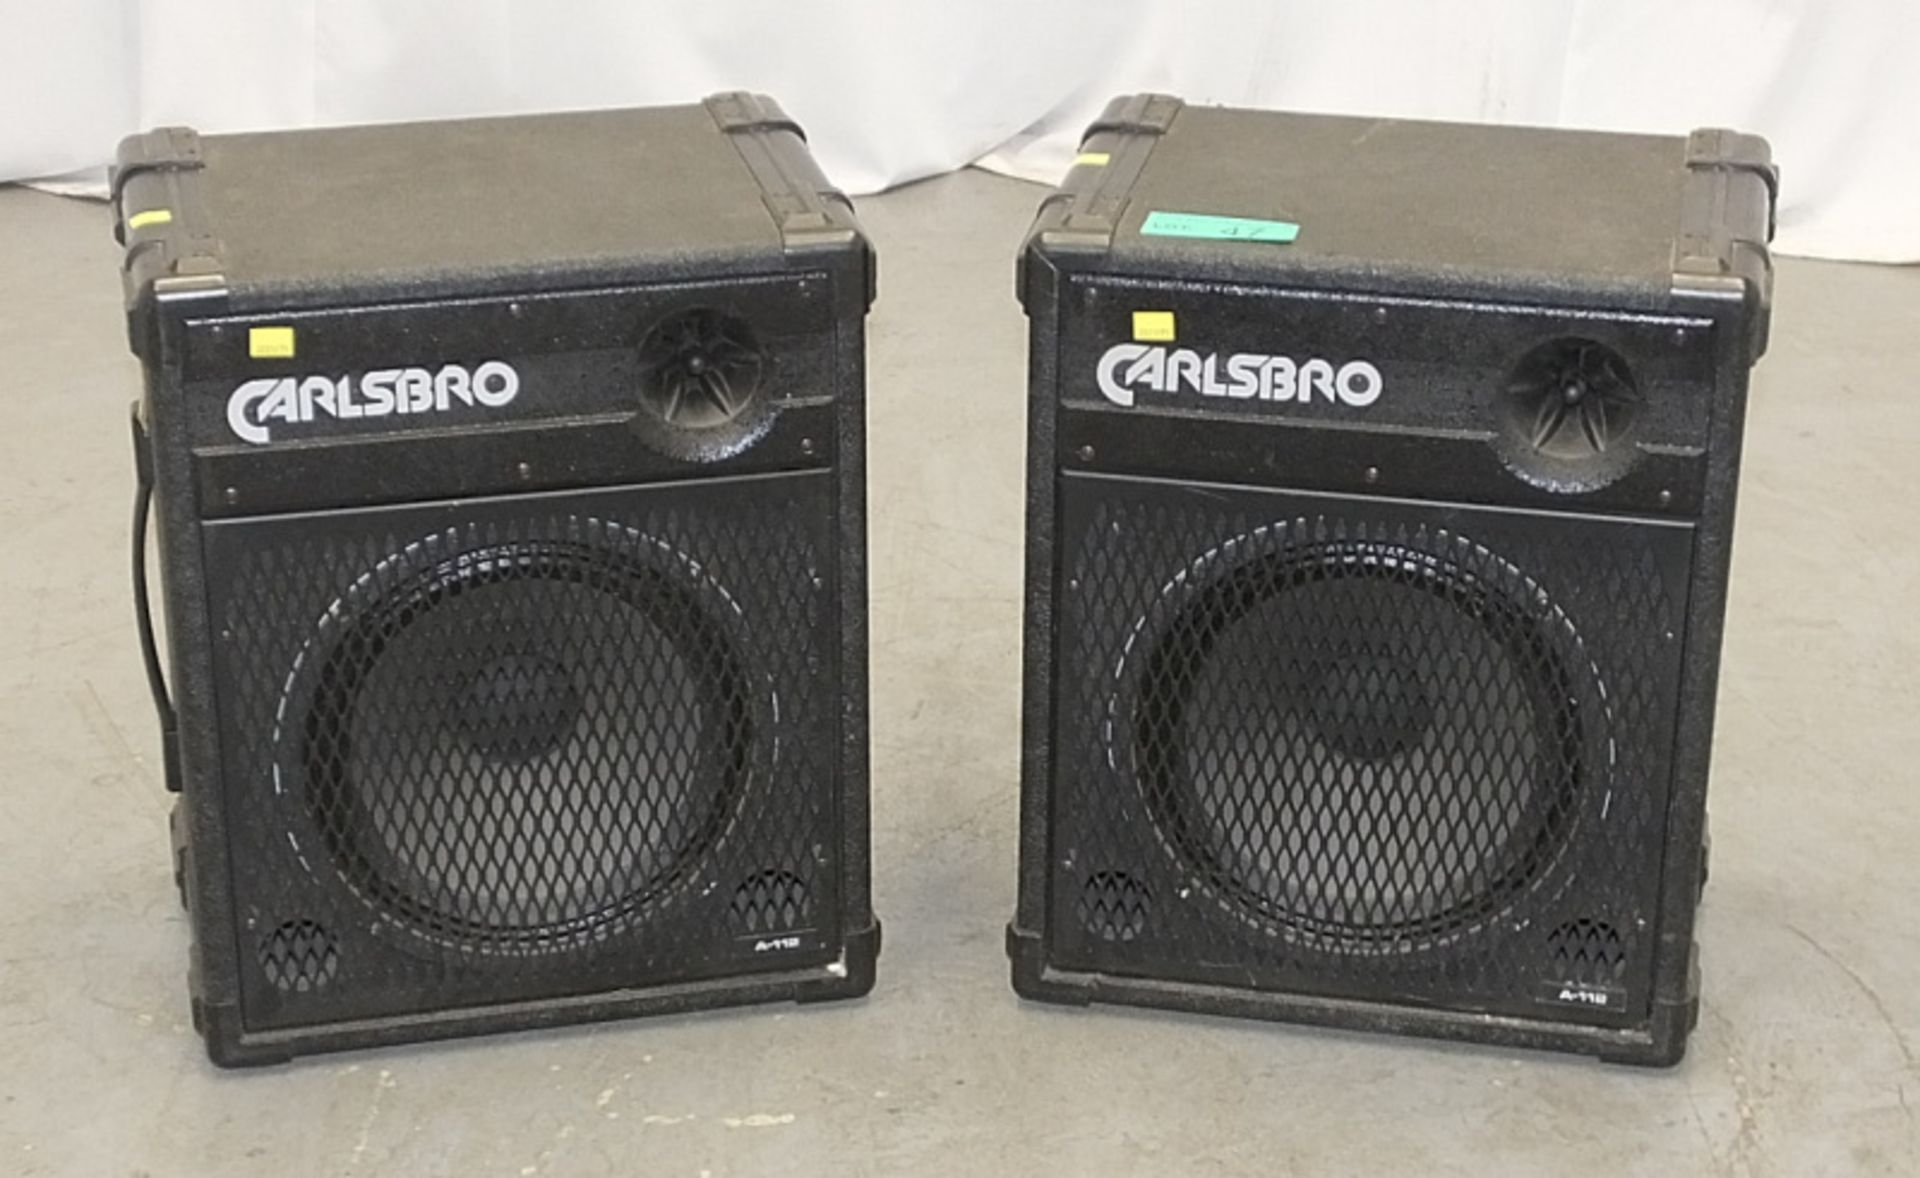 2x Carlsbro A-112 PA Speakers (one as spares or repairs)